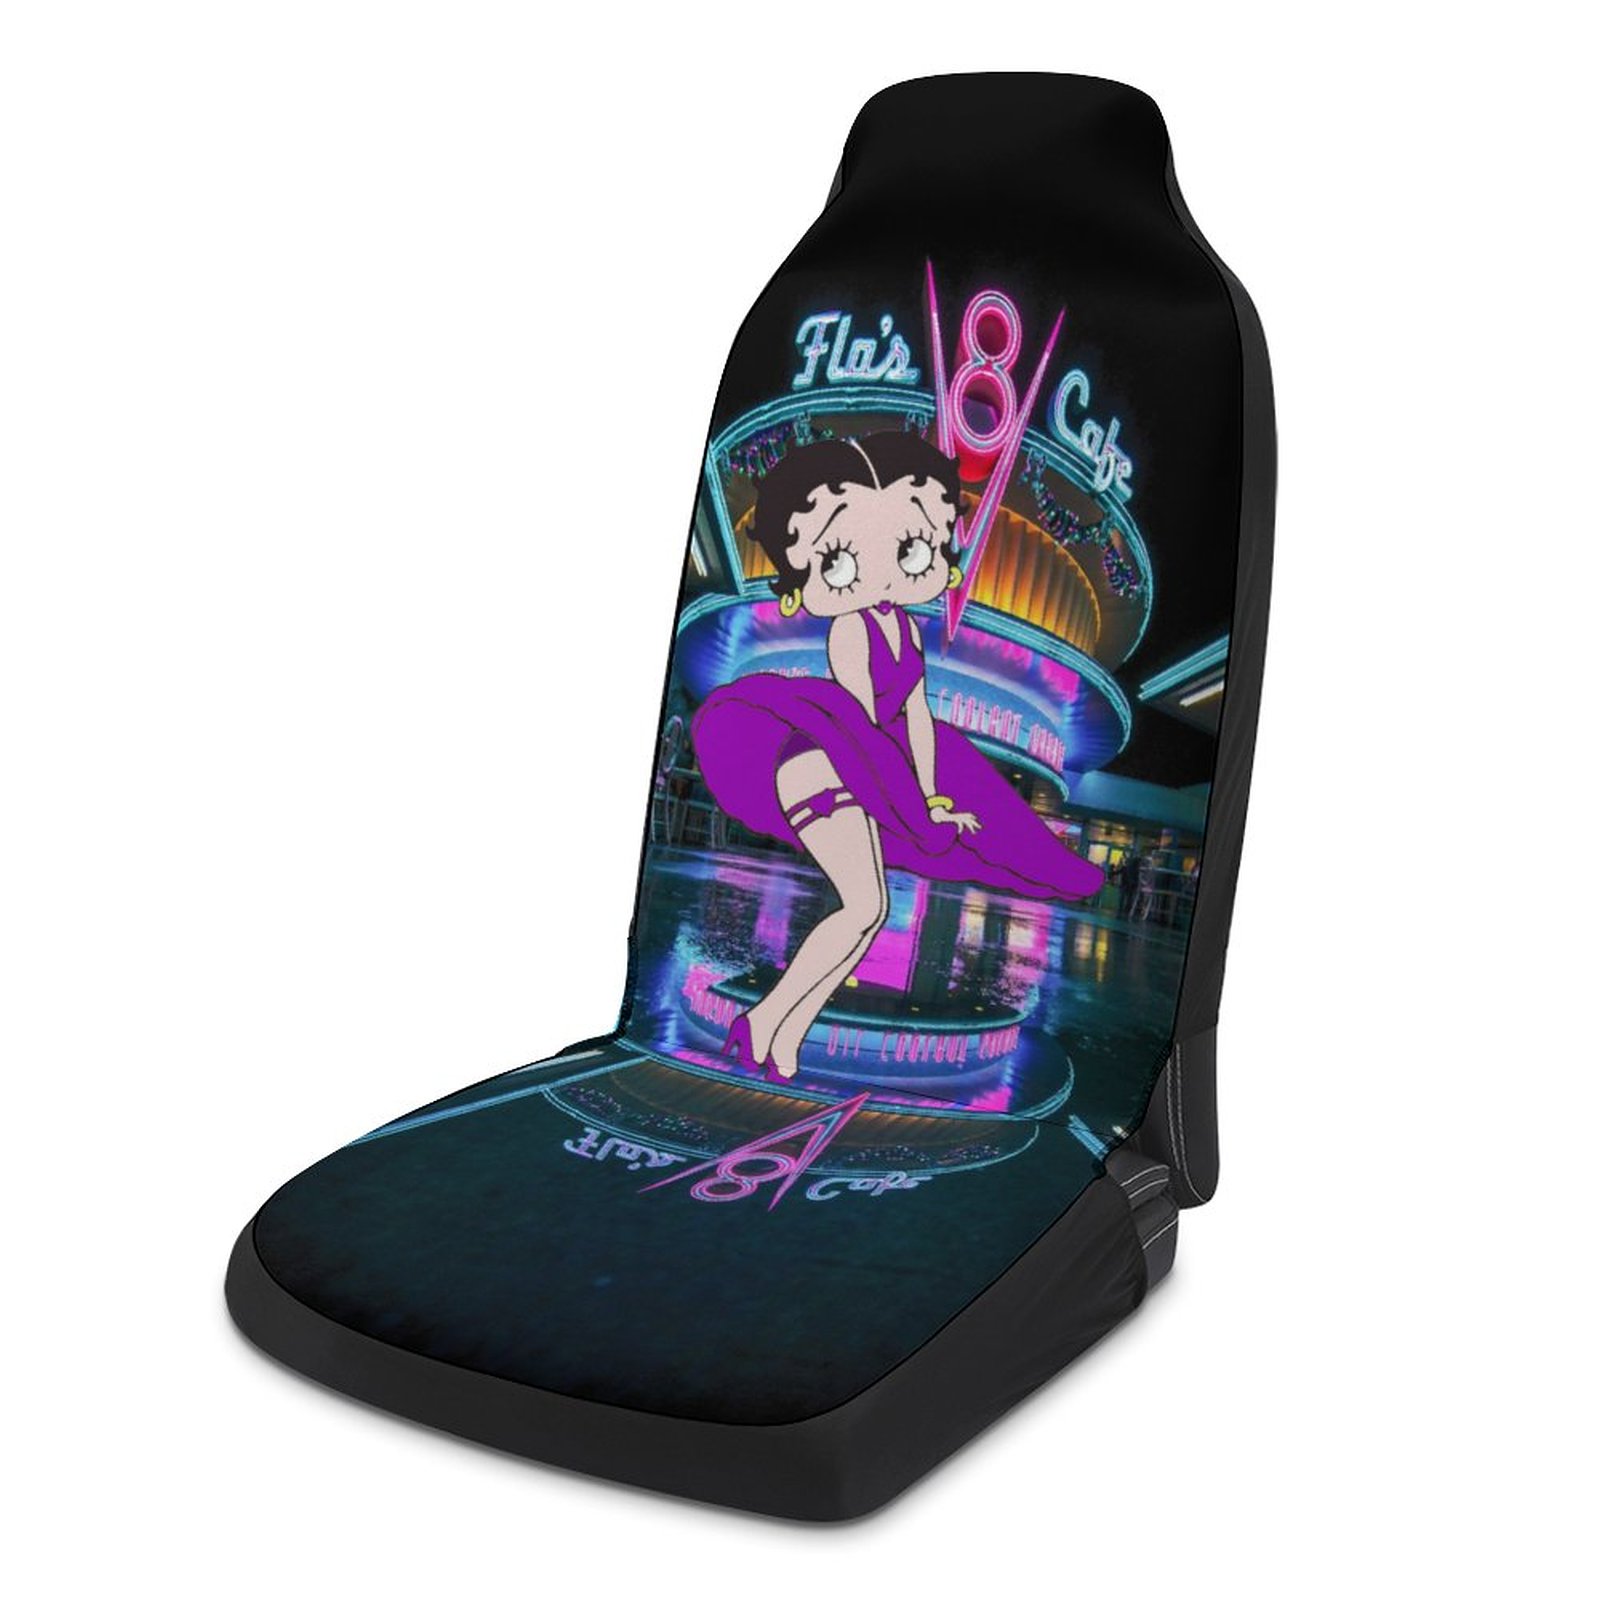 seat covers to keep you cool